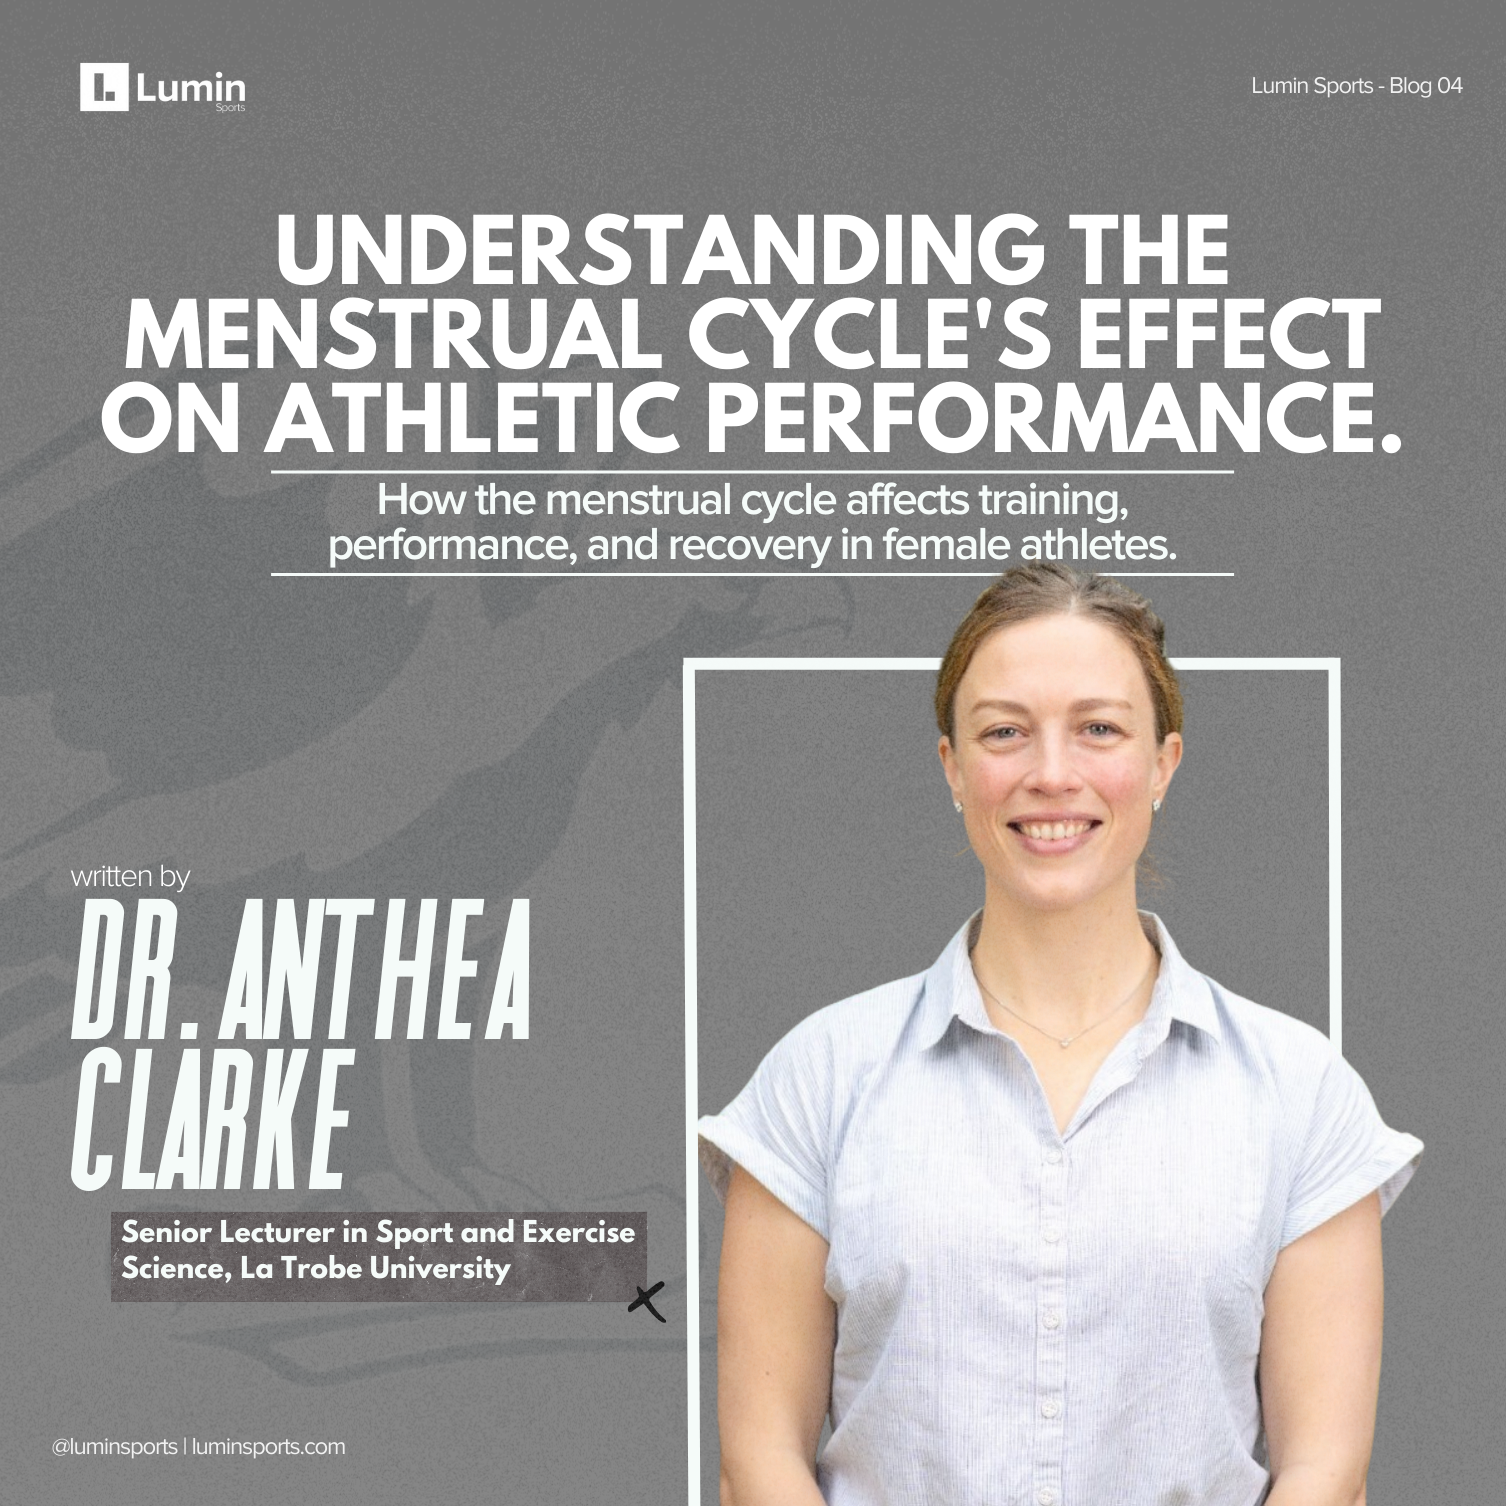 Understanding The Menstrual Cycle's Effect on Athletic Performance